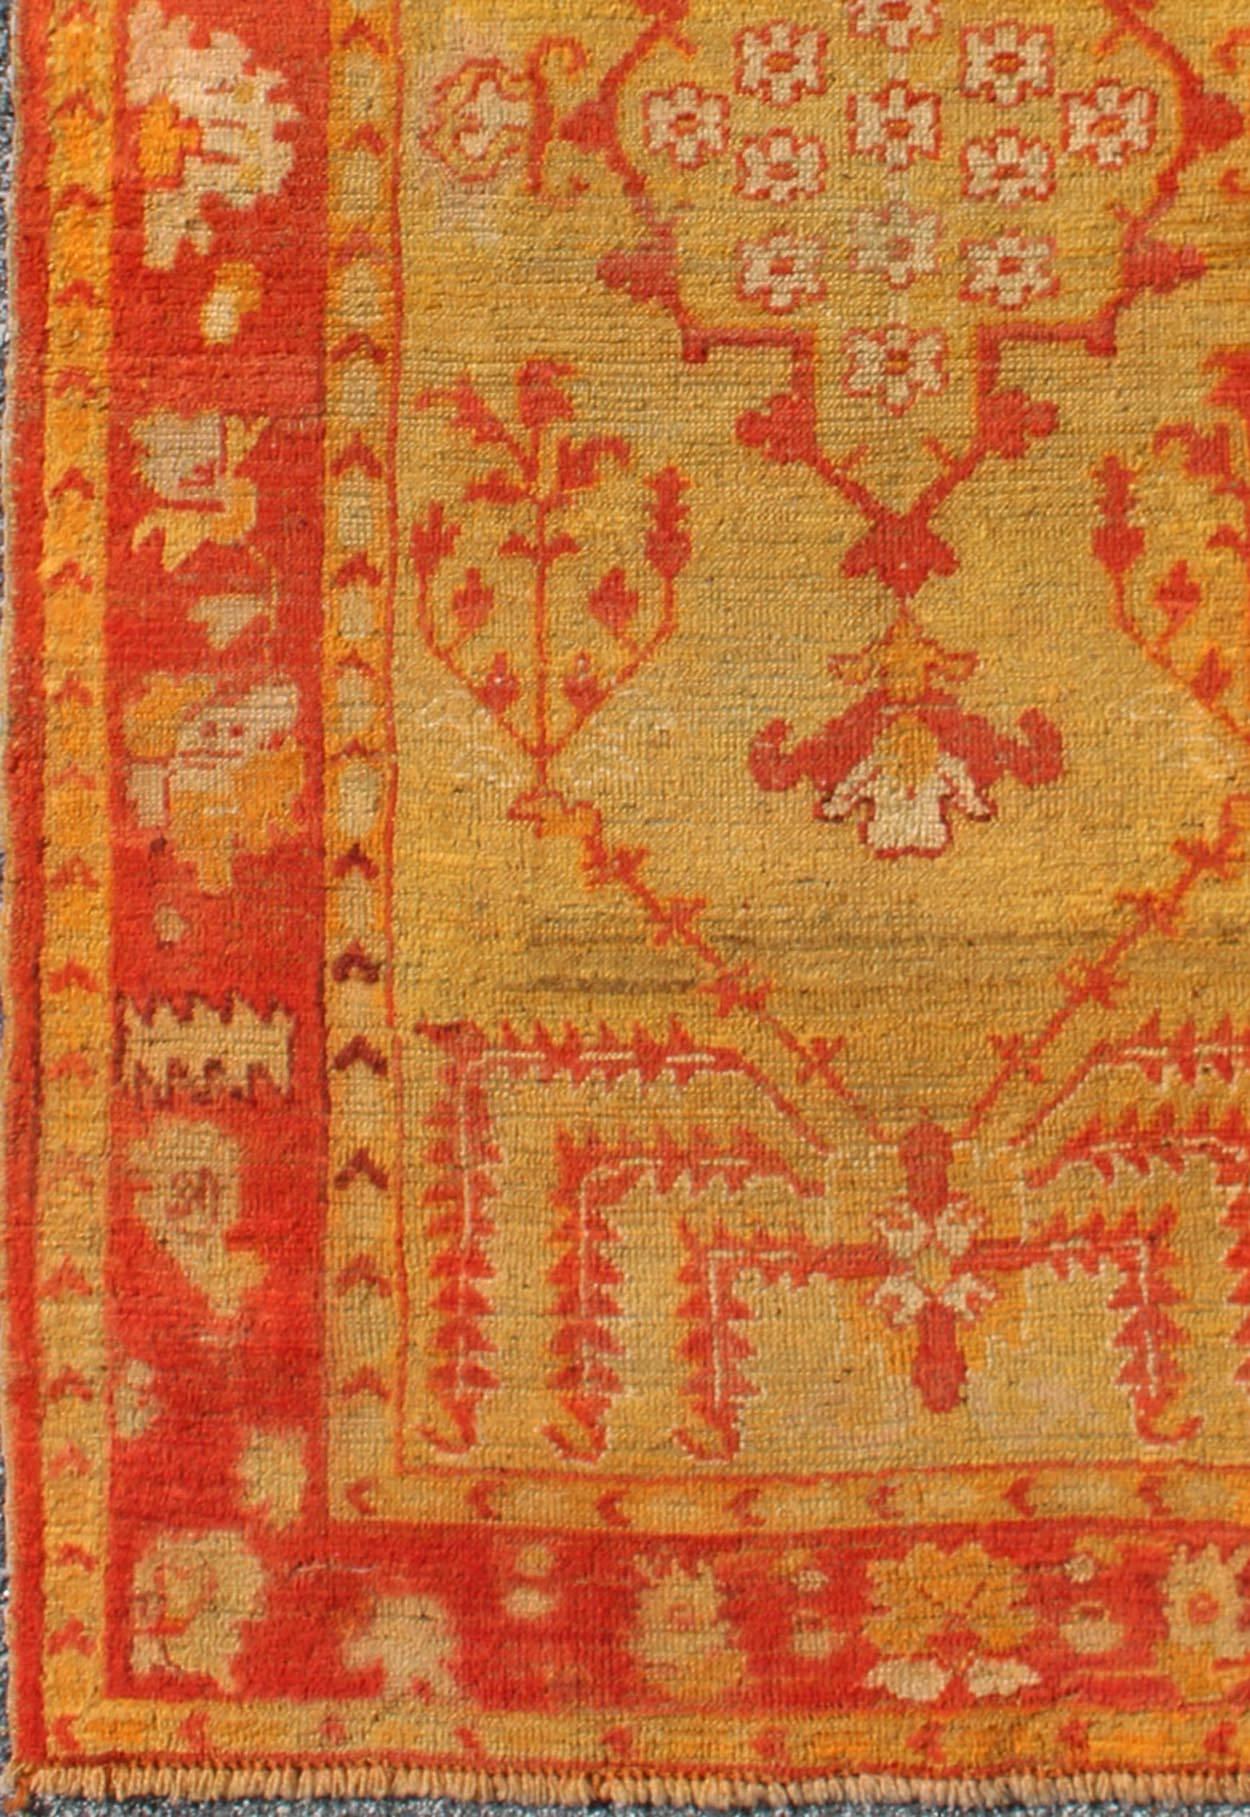 Antique Turkish Oushak Rug With Orange Red and Yellow-Green and Medallion Design. Small Antique Oushak, Keivan Woven Arts/ rug/L11-1102 origin/Turkey, Style/ Oushak, small antique Oushak rug.

Measures: 3'1 x 5'3.

The stylized motifs in this unique